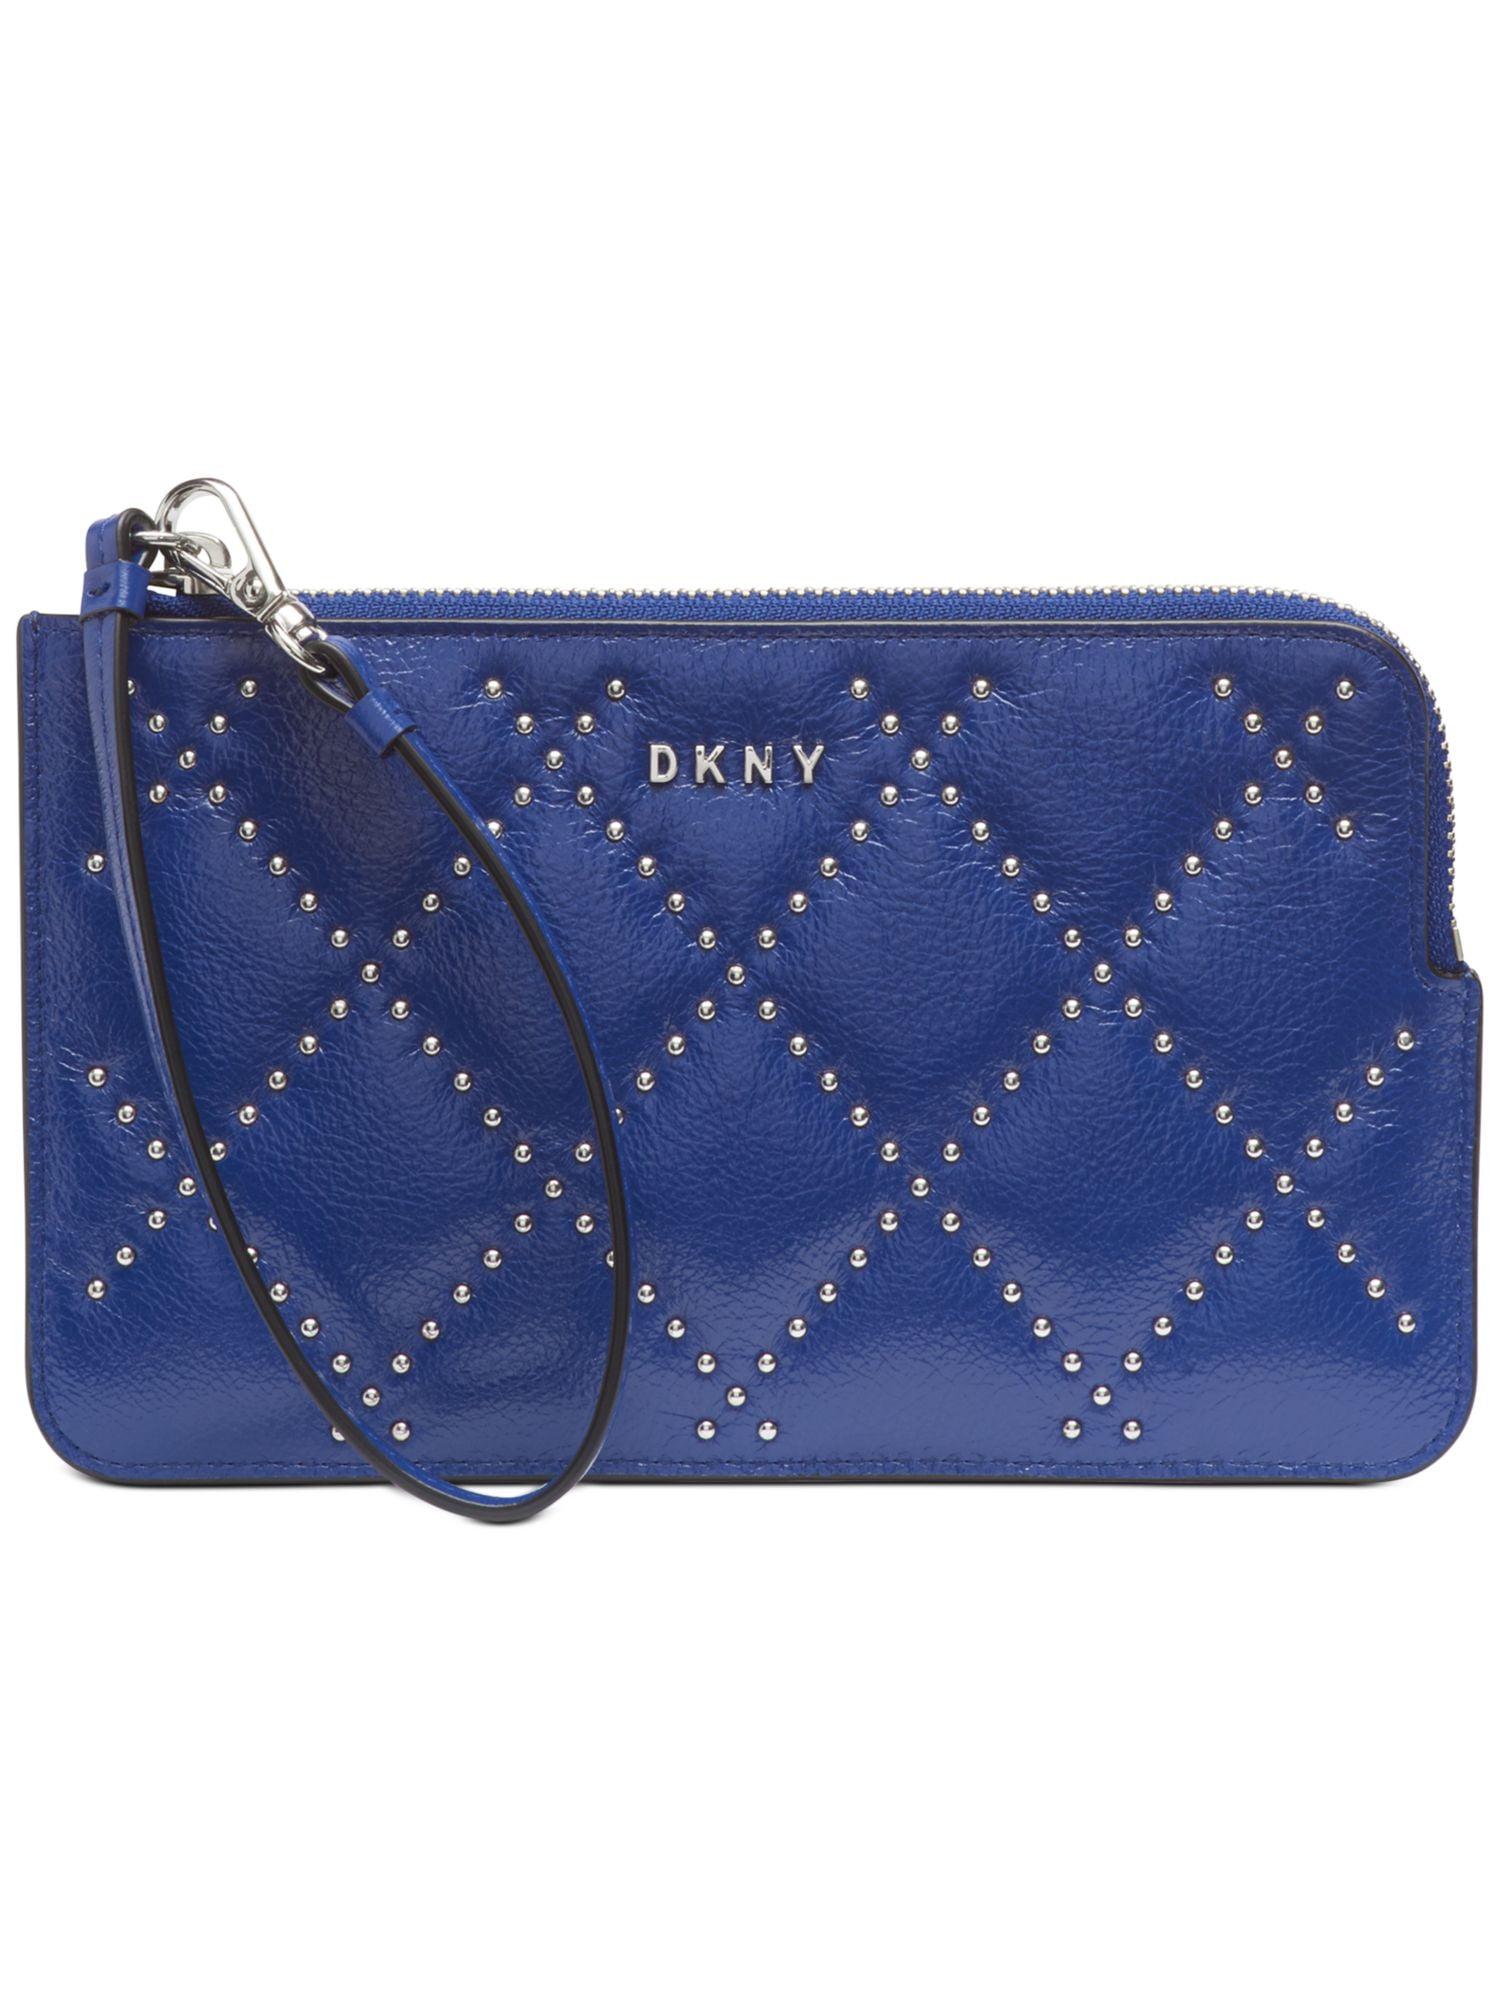 DKNY SINA Small Flap Shoulder Bag Crossbody quilted Purse Baby Blue/Teal  for sale online | eBay